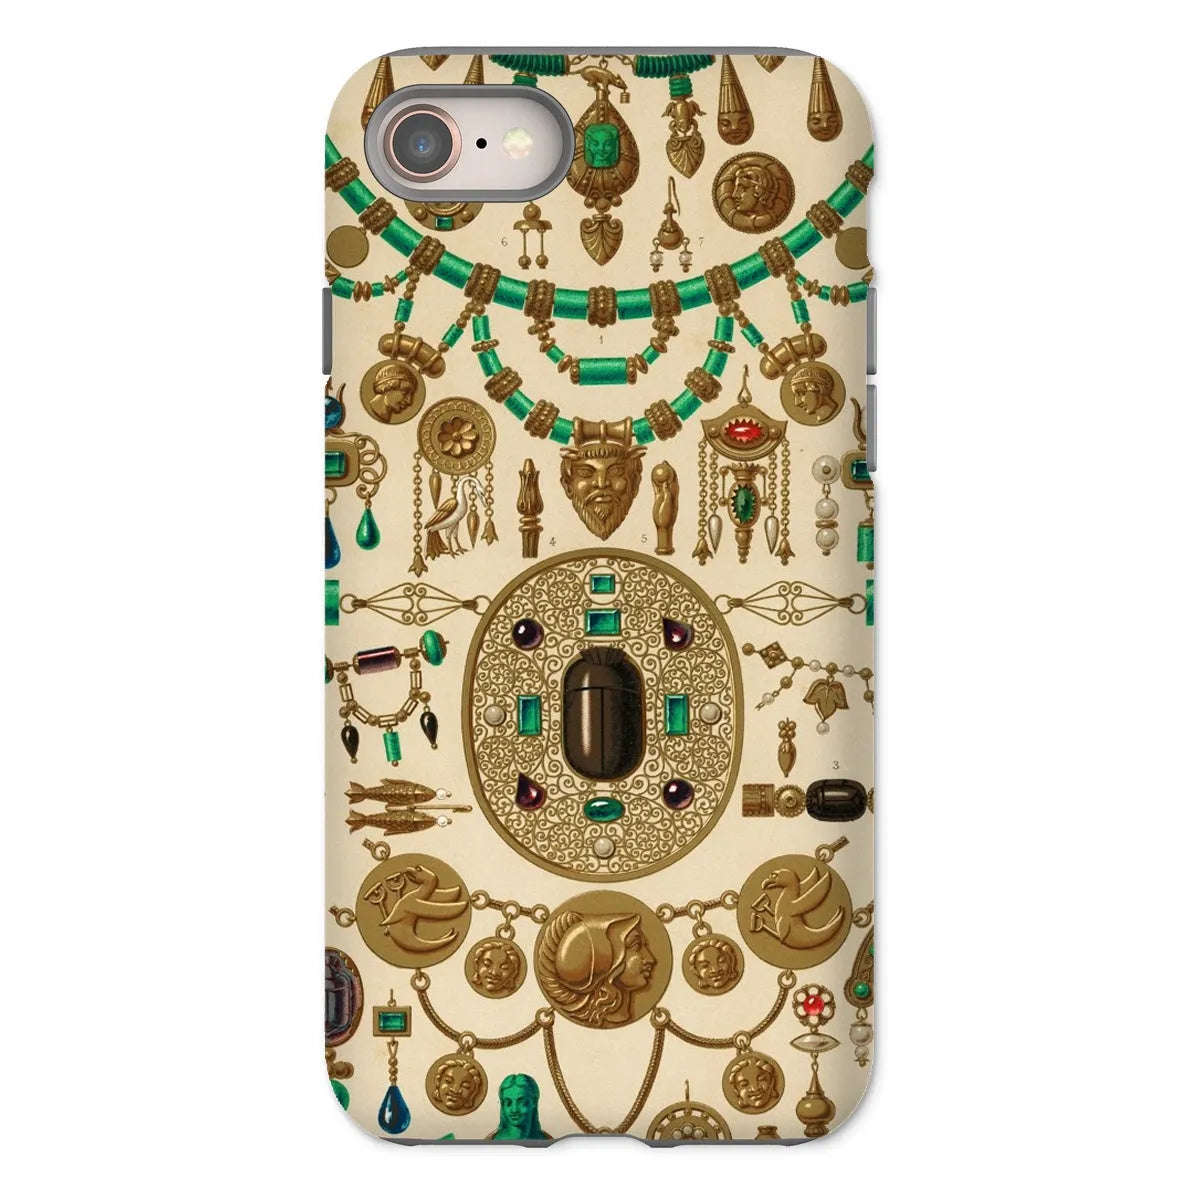 Etruscan Jewelry By Auguste Racinet Art Phone Case - Iphone 8 / Matte - Mobile Phone Cases - Aesthetic Art